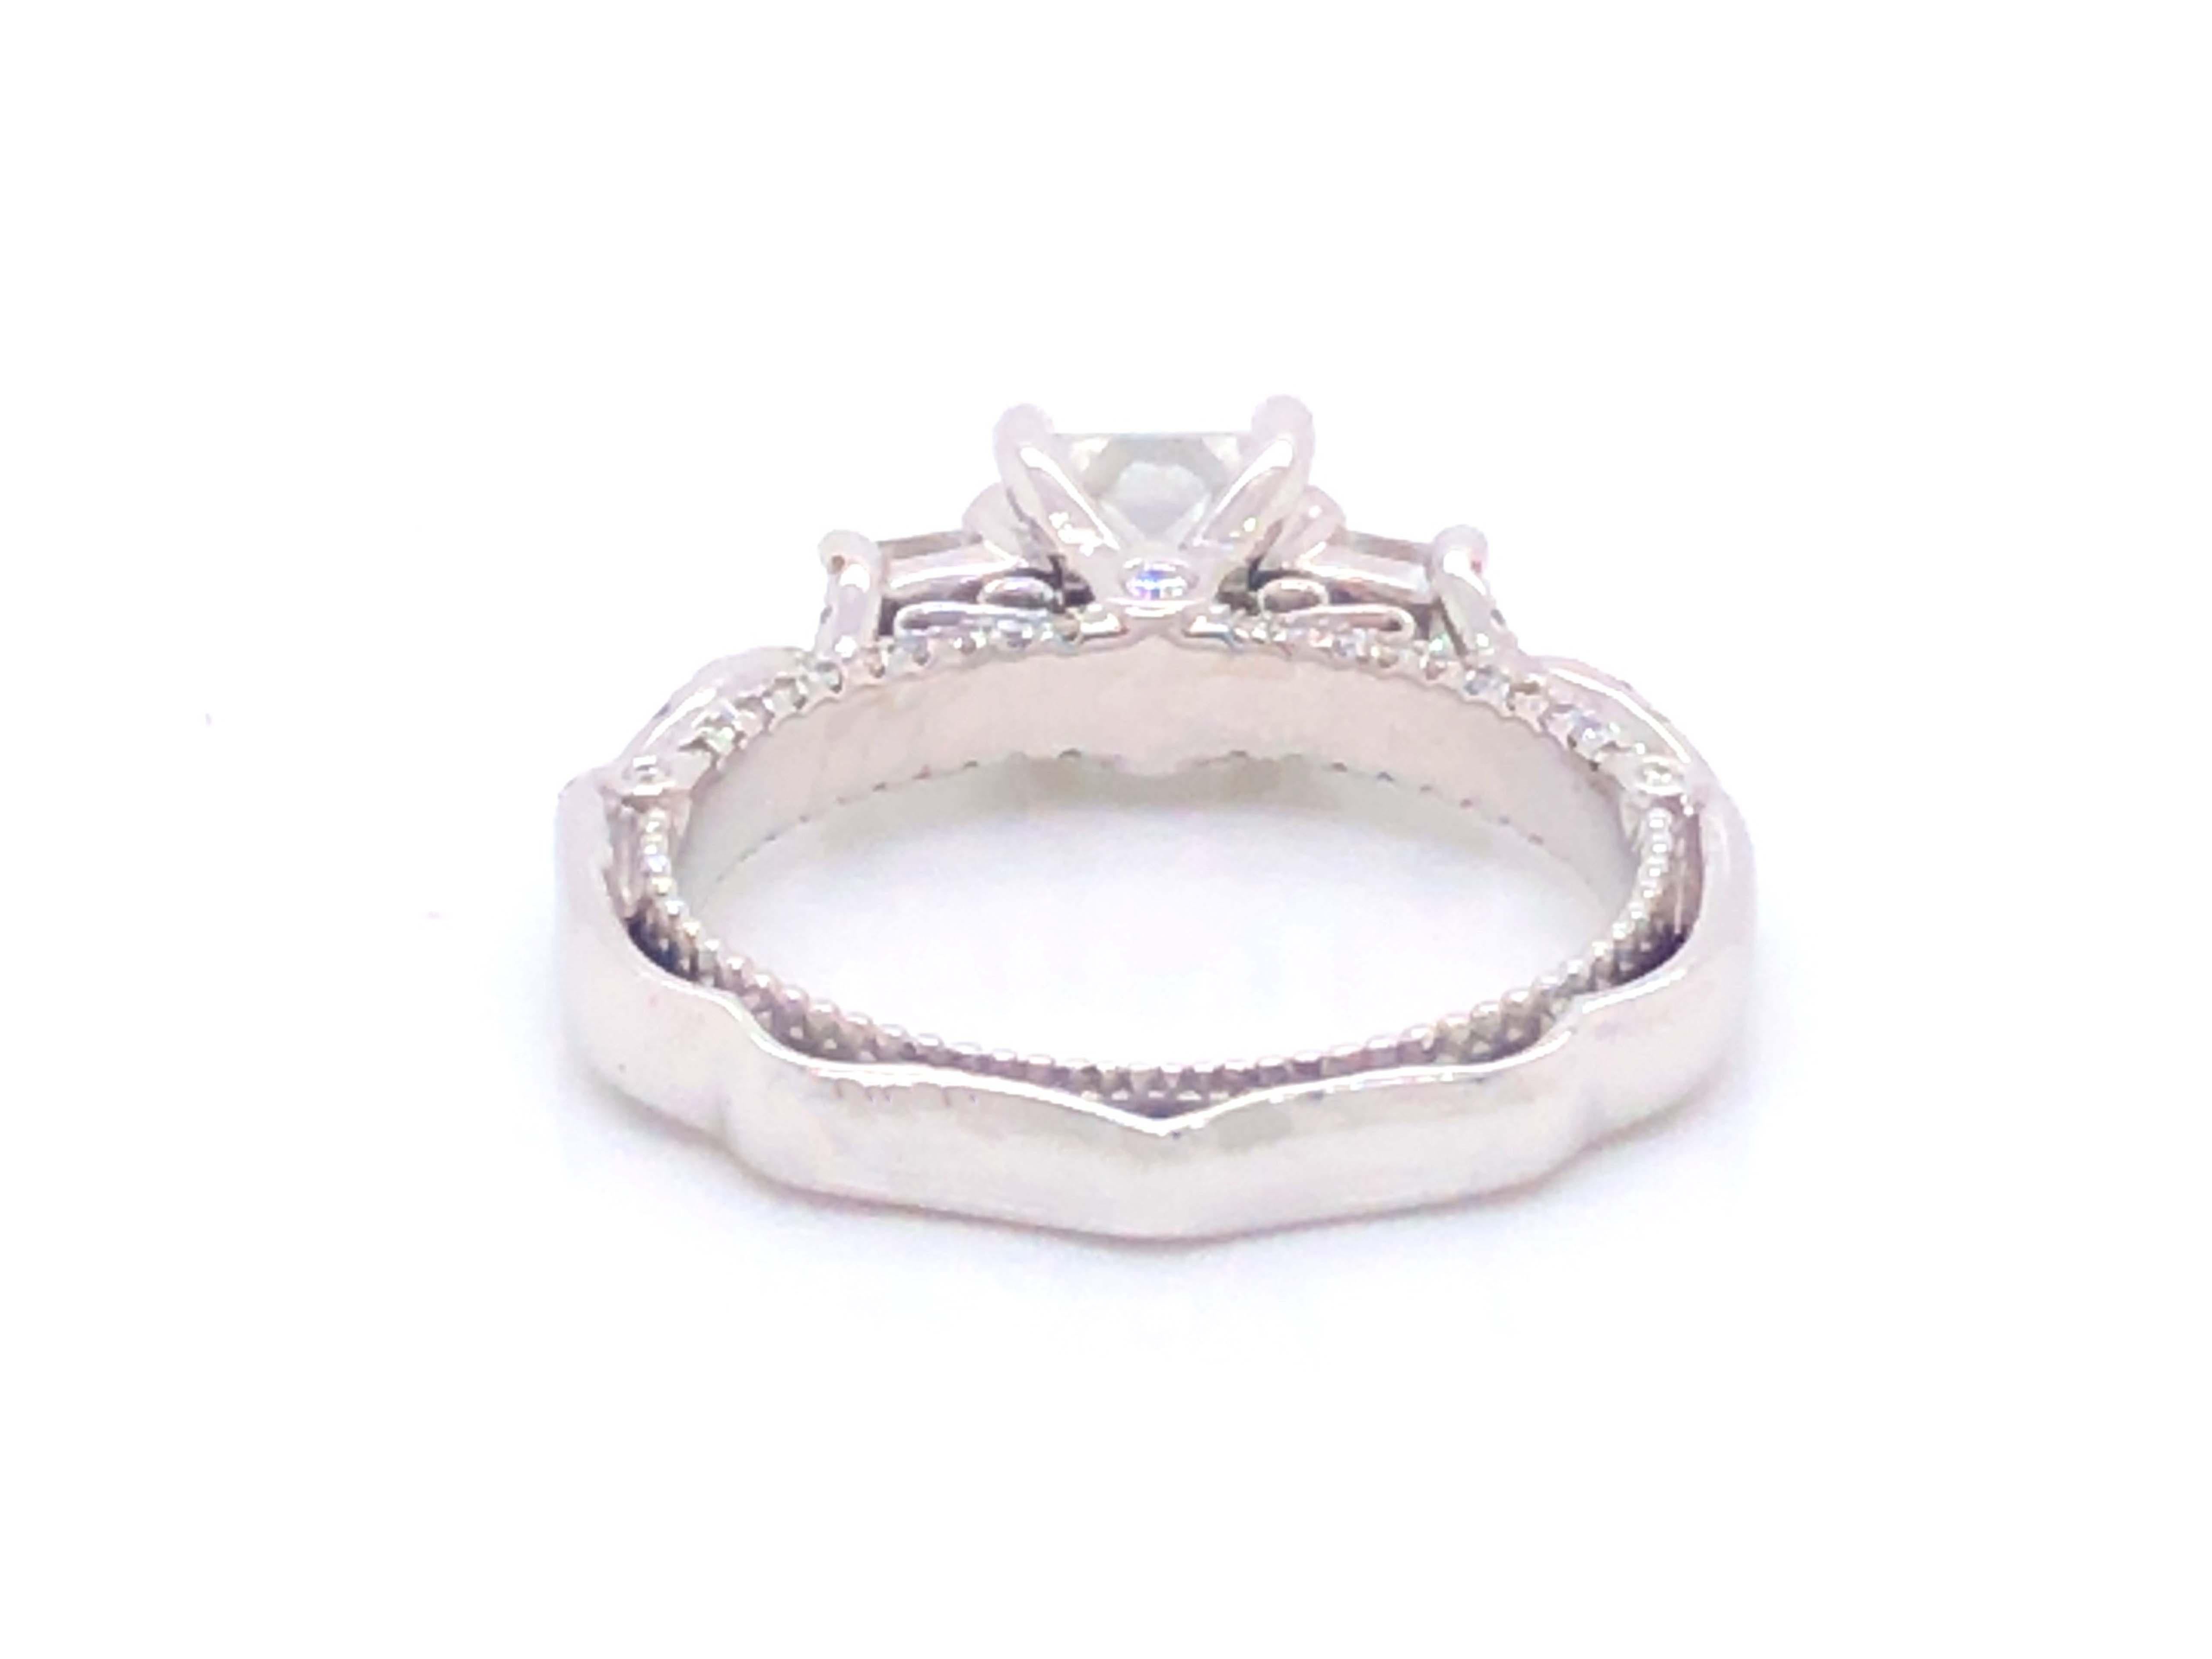 Verragio Princess Cut Diamond Engagement Ring Set in 14K White Gold For Sale 2